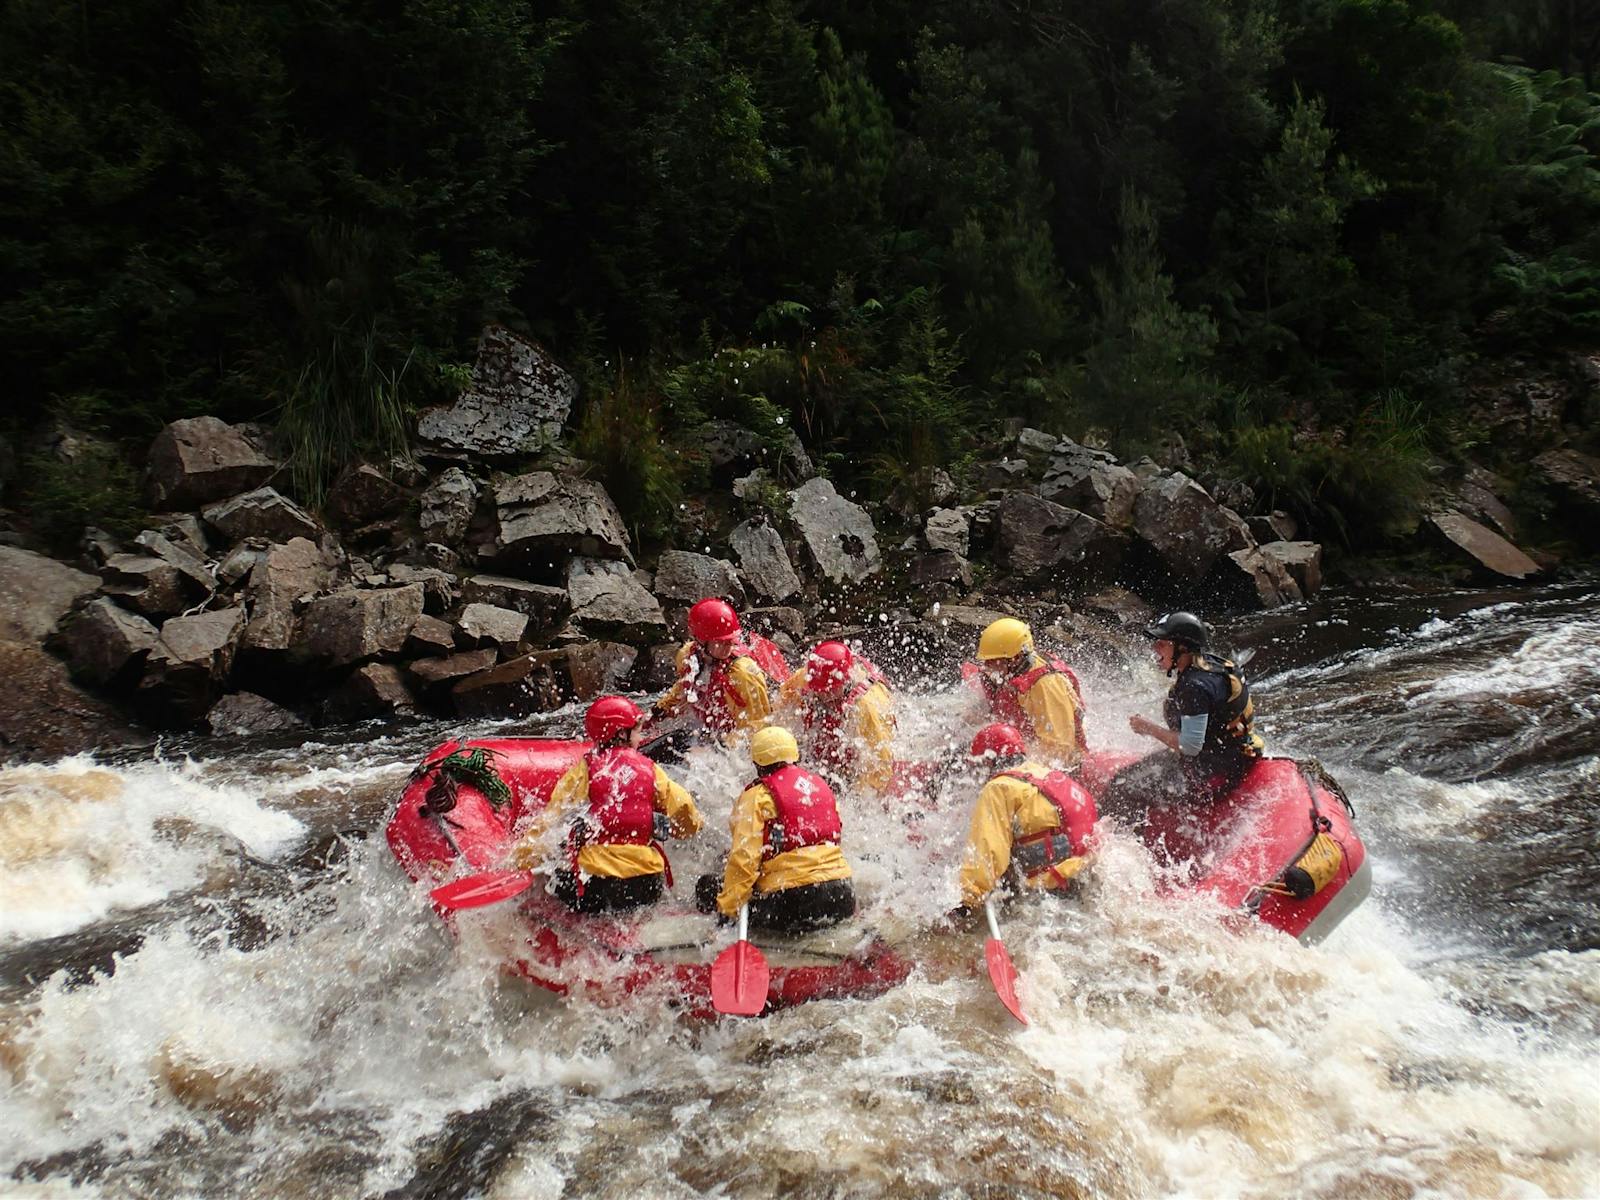 Rafting excitement in King River Gorge